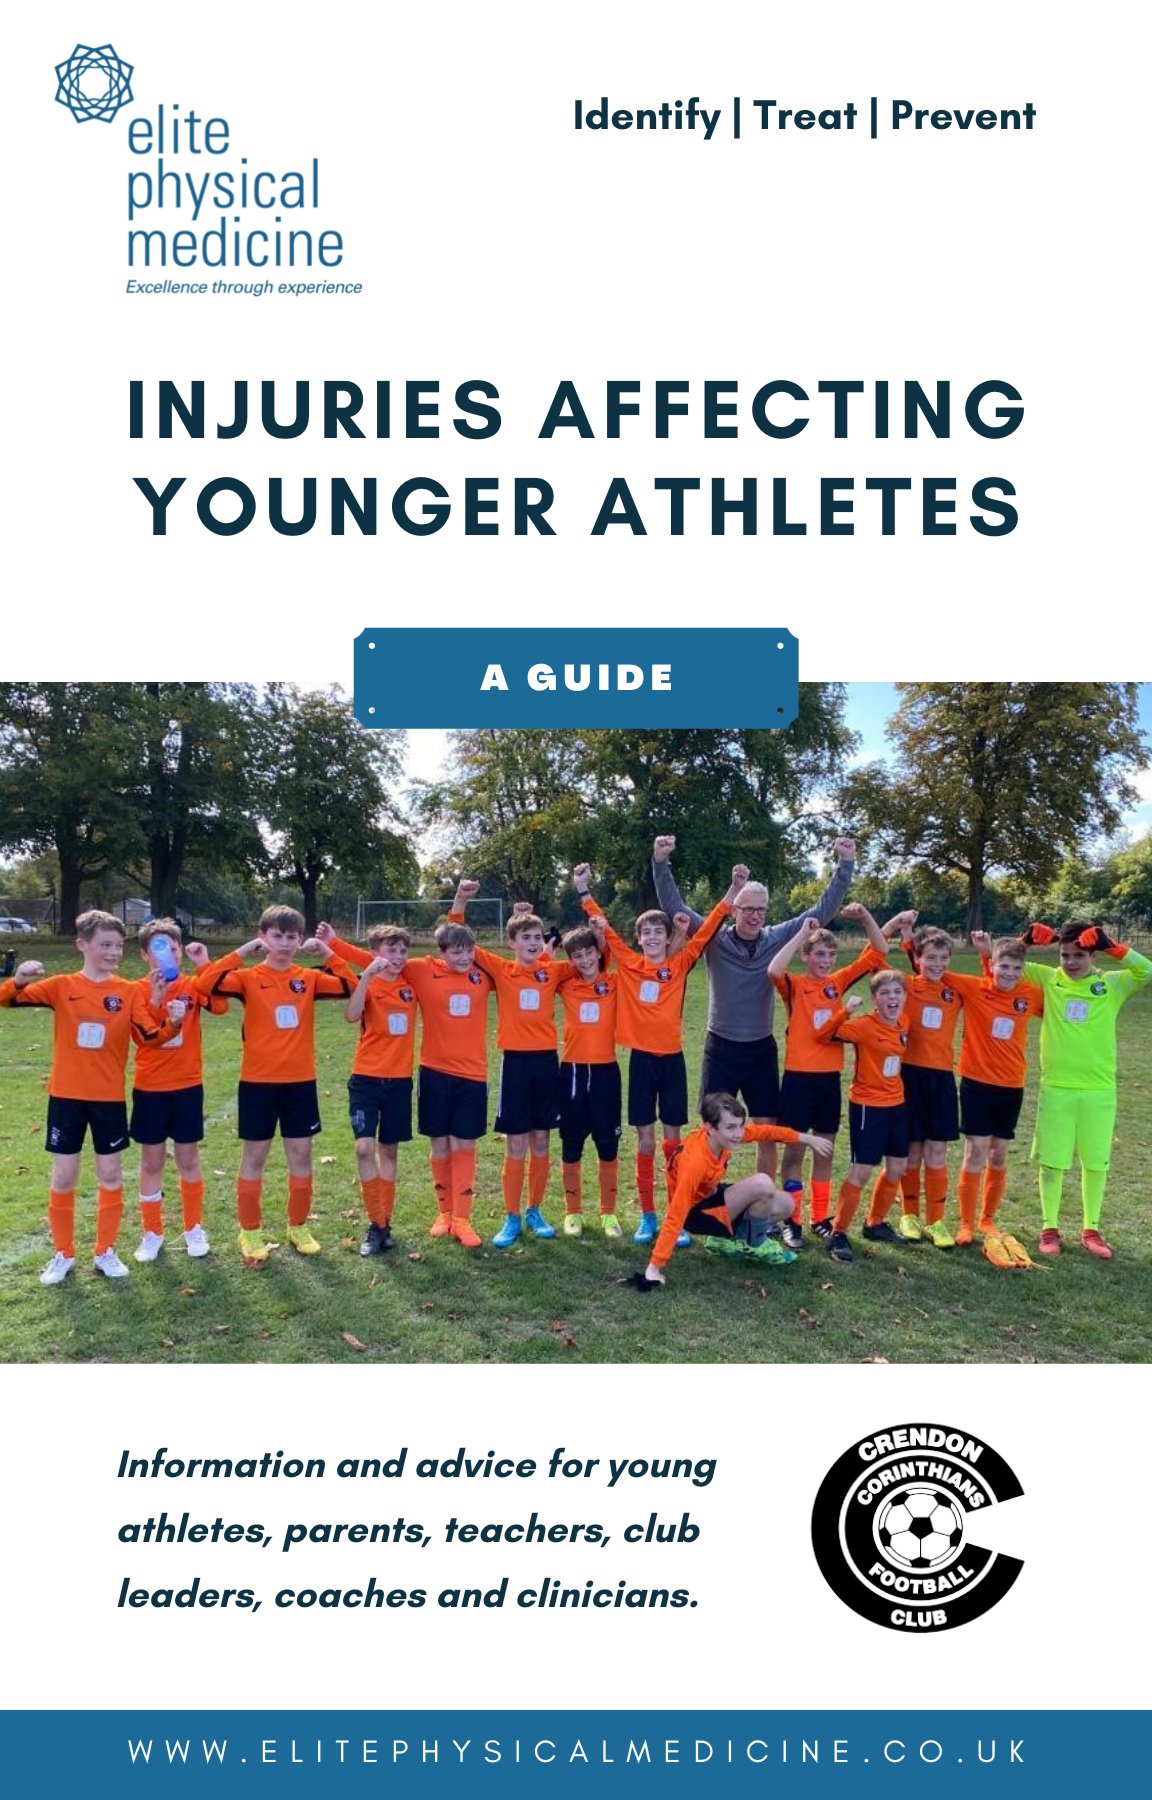 Injuries affecting younger athletes - a guide